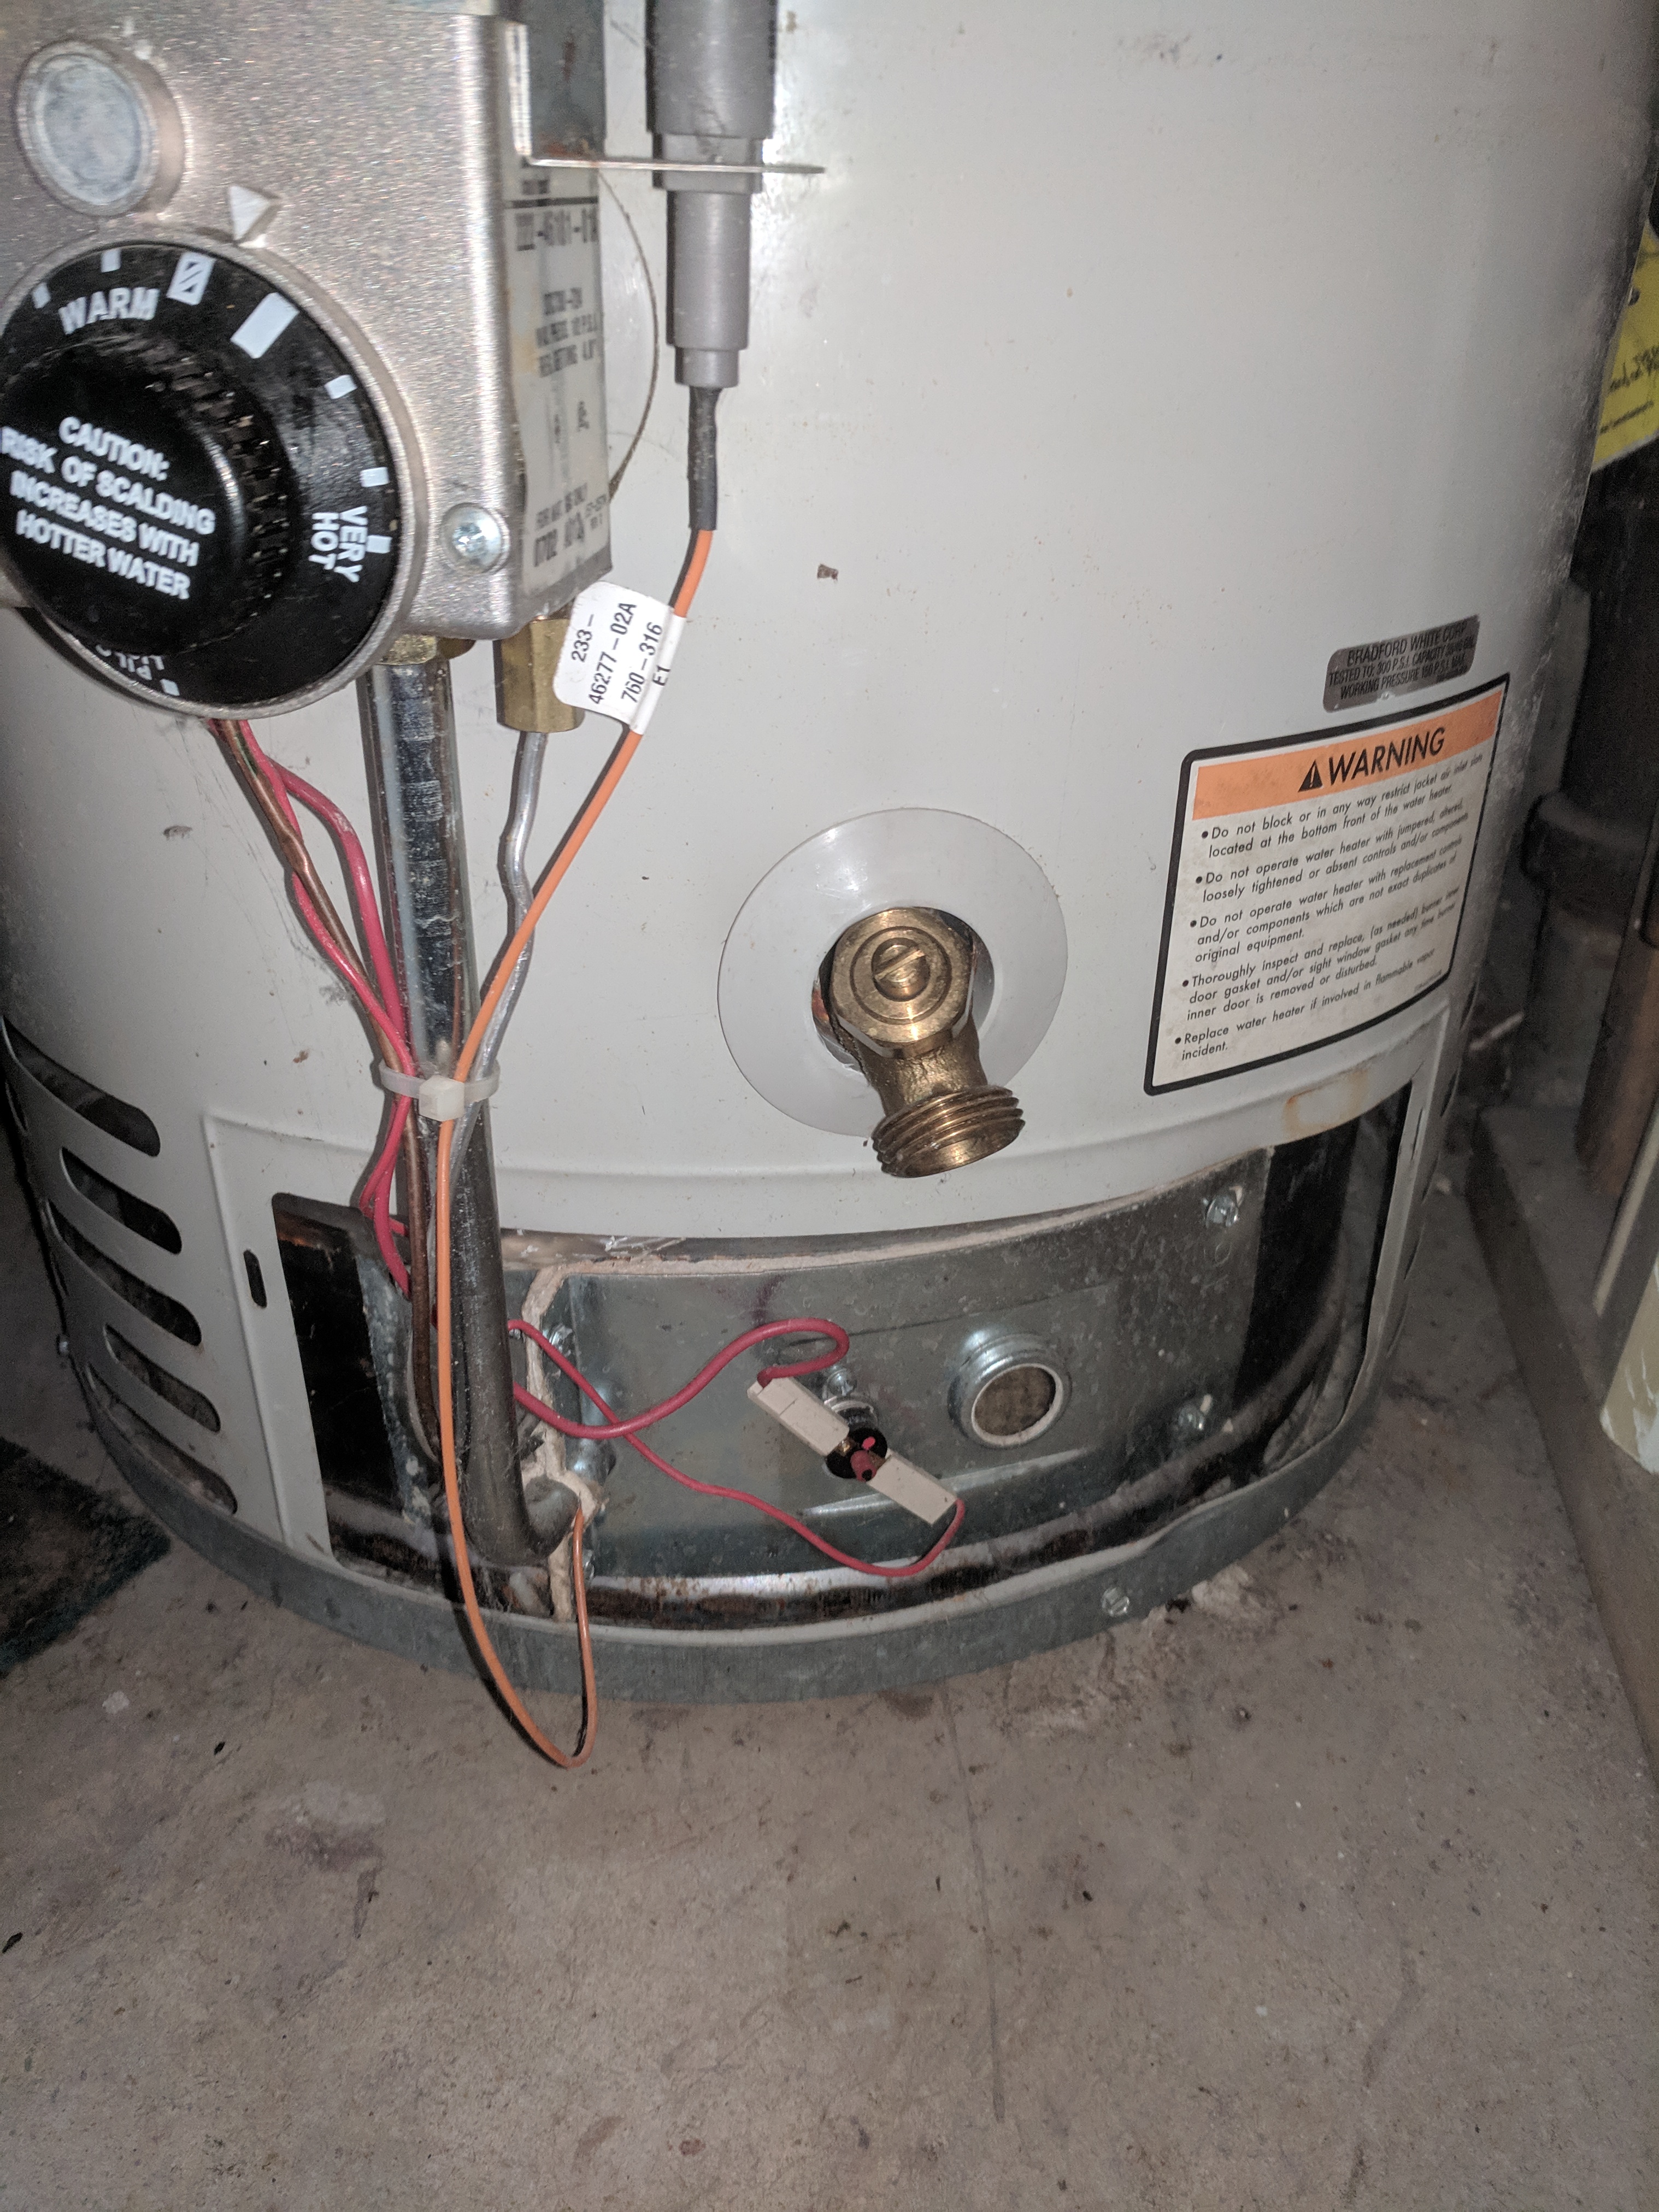 How to Drain a Water Heater